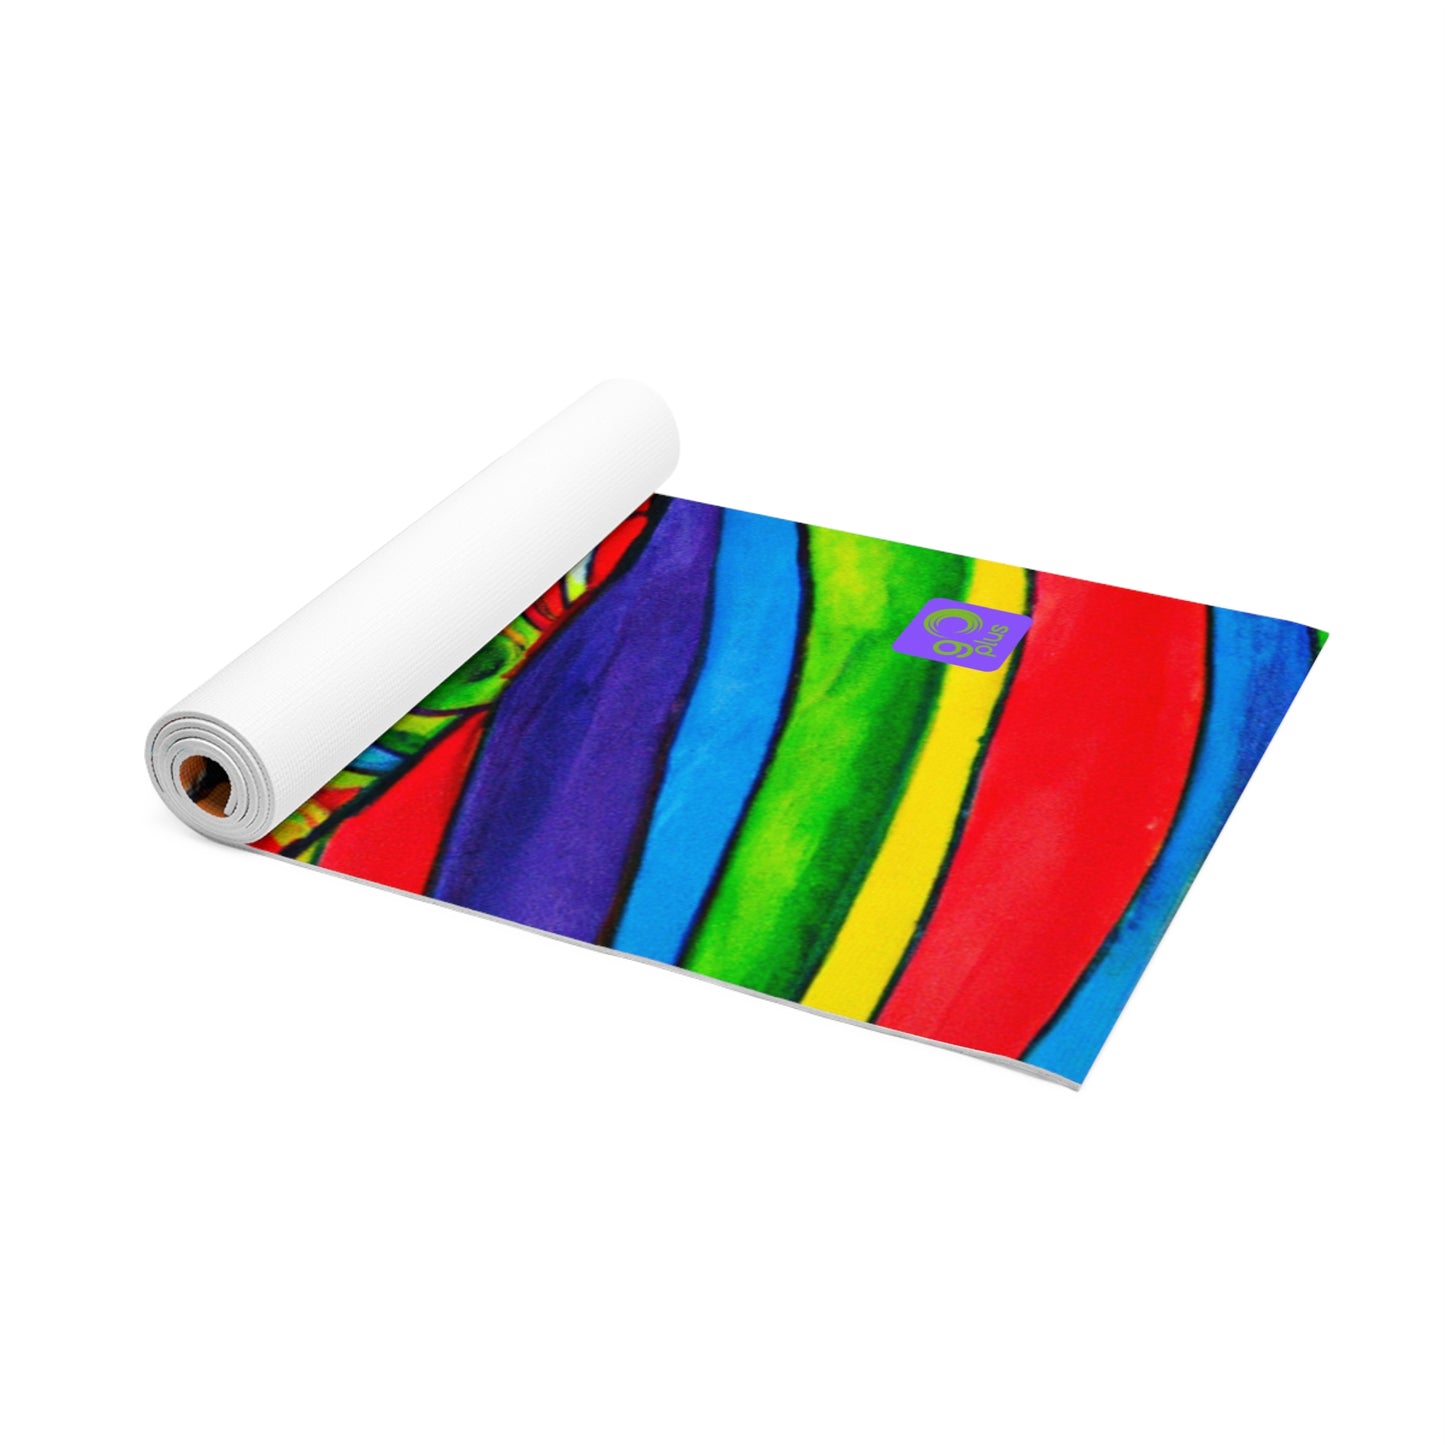 "Energized Sports Art: Capturing the Motion of the Game" - Go Plus Foam Yoga Mat